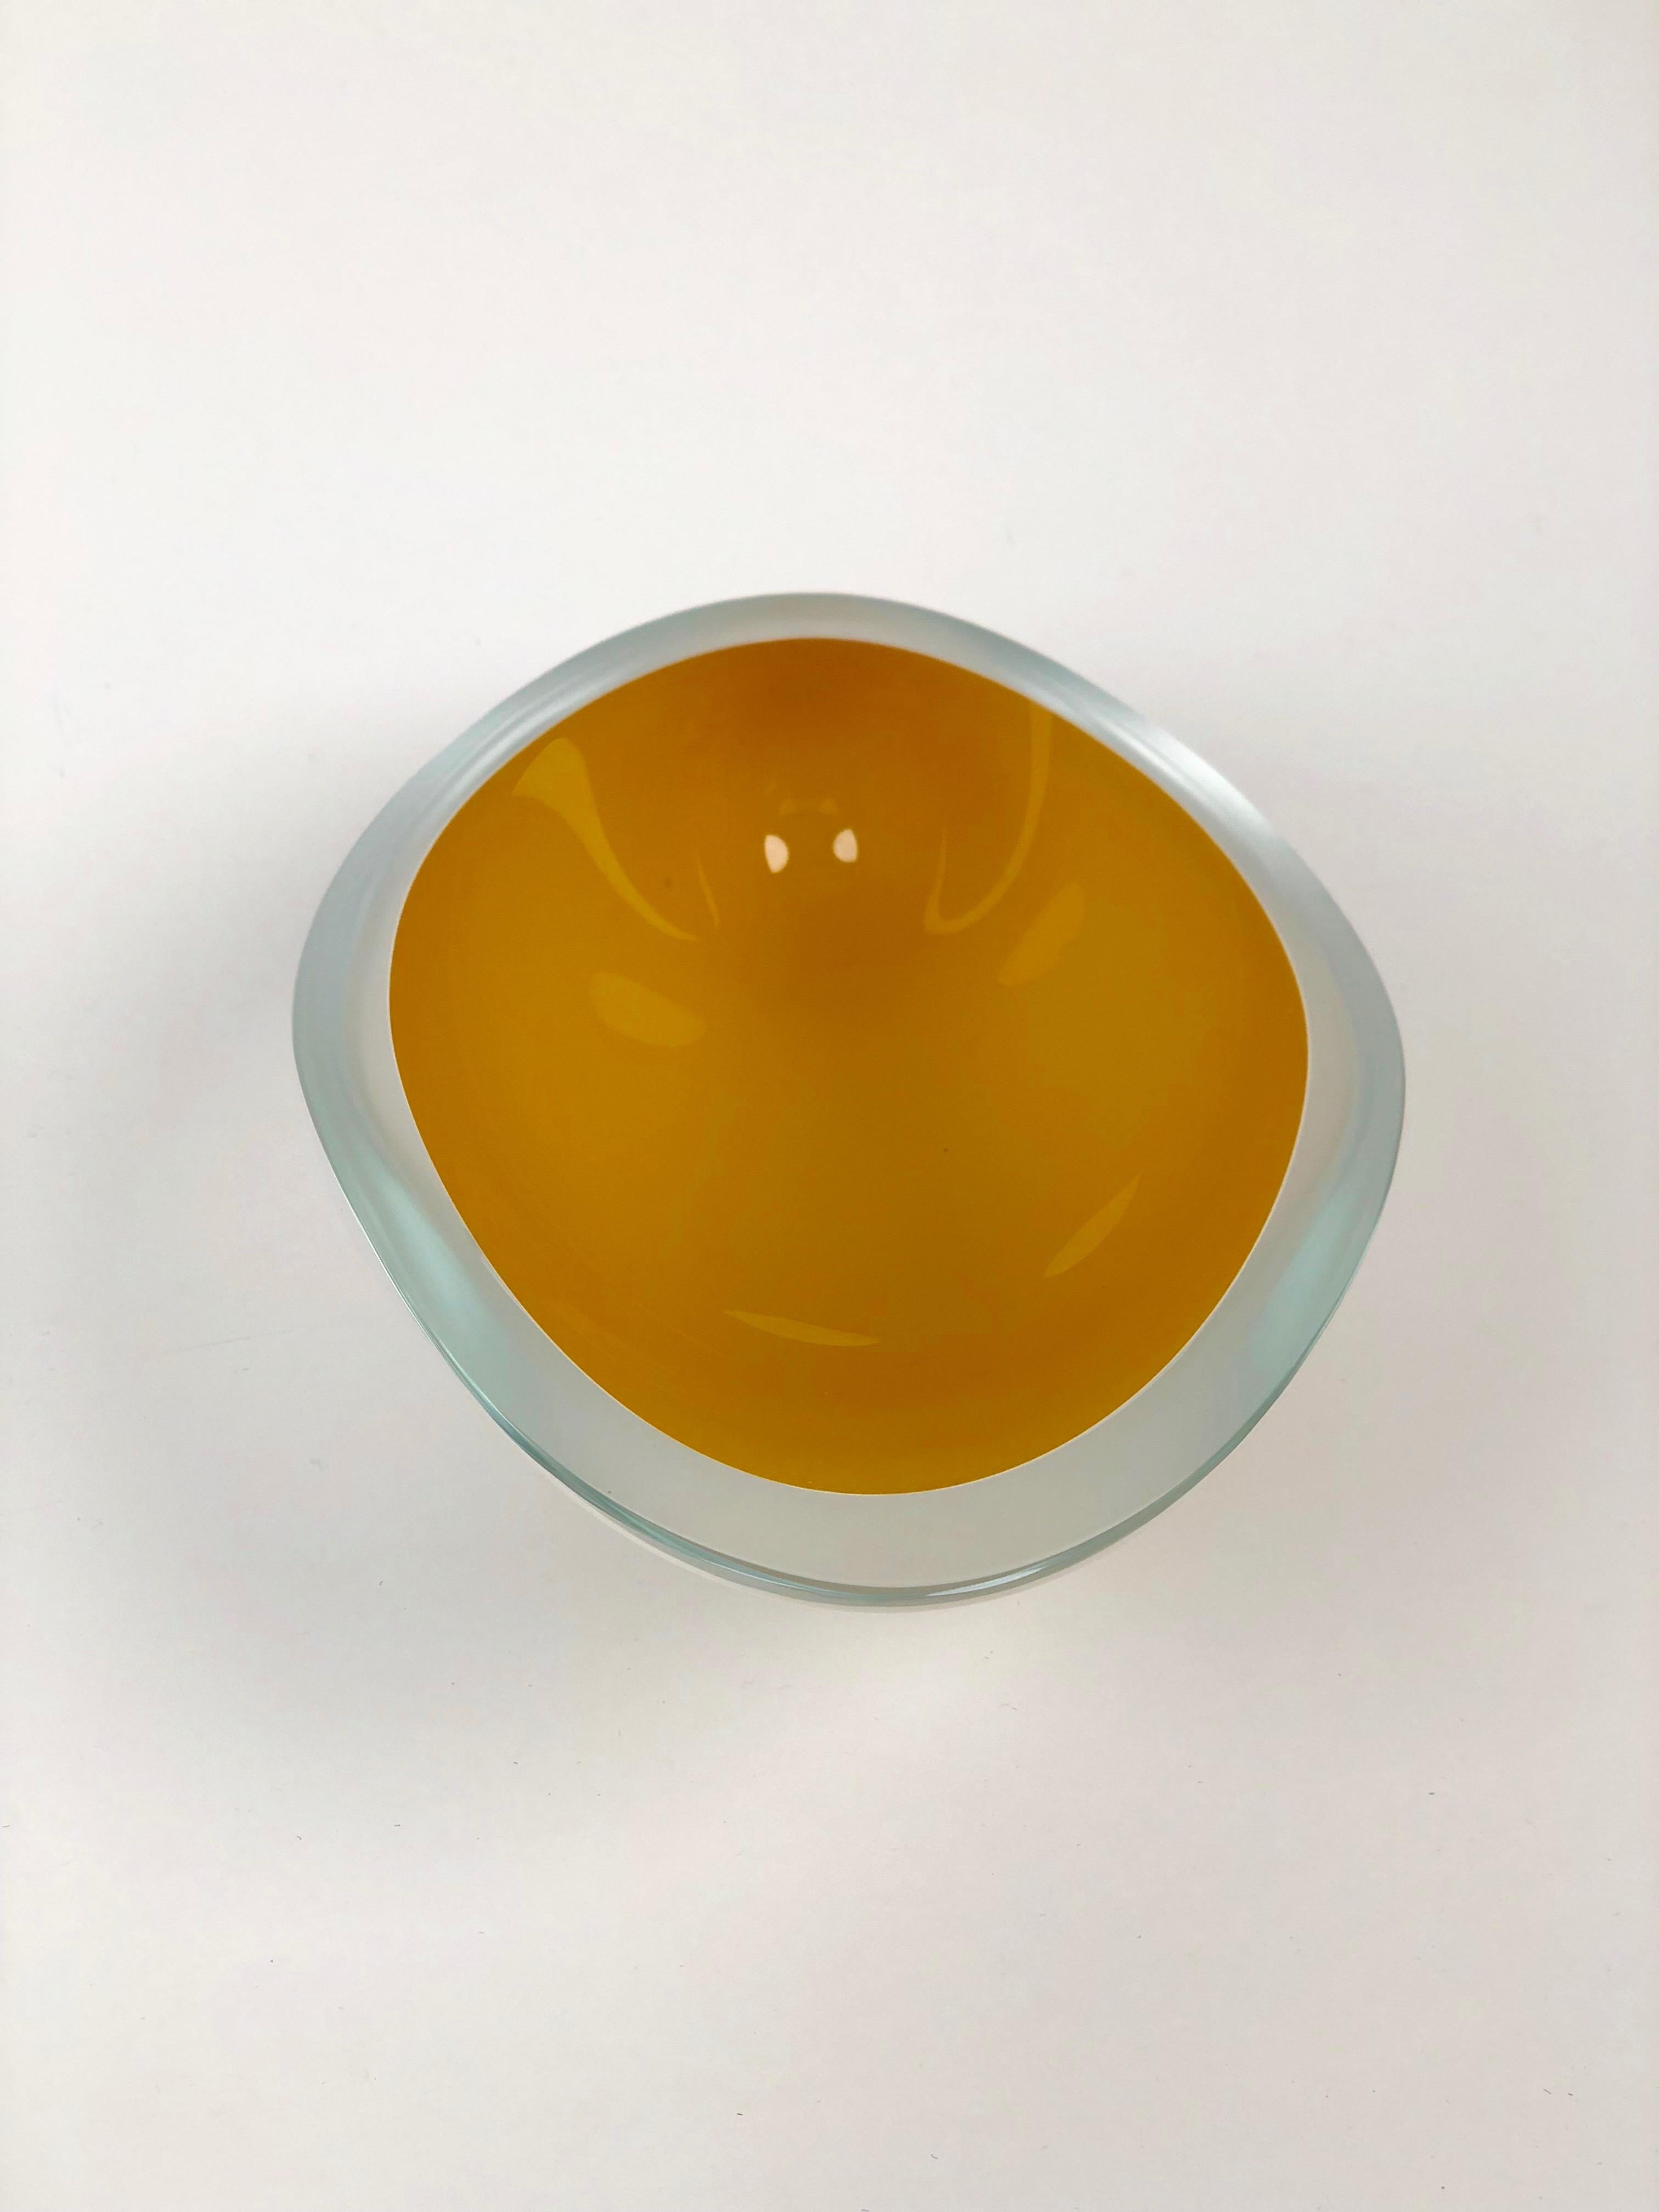 Contemporary Studio Glass Bowl Made in the Czech Republic After 2010 For Sale 1